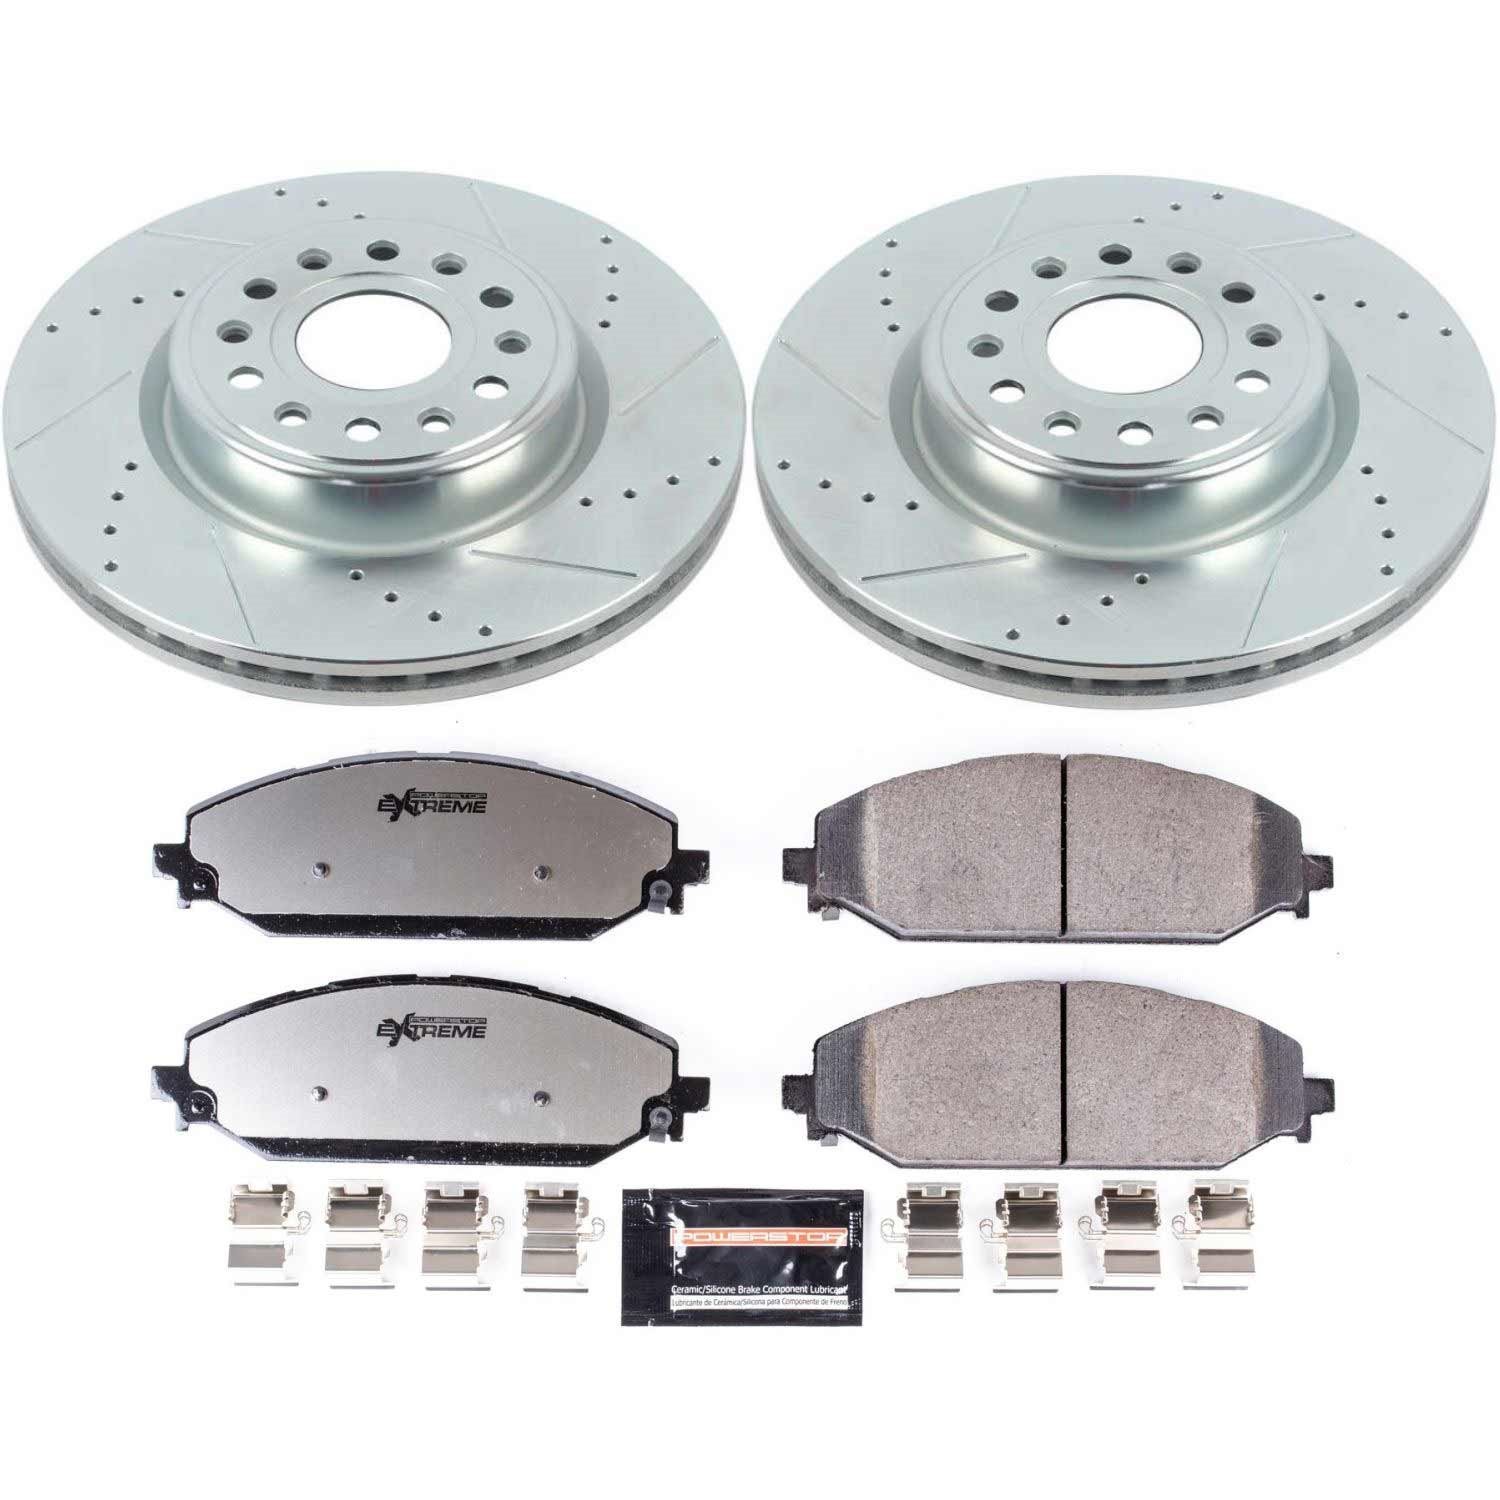 Z36 Front Brake Pads & Rotor Kit for Truck and Tow Fits Select Ram 1500 Trucks